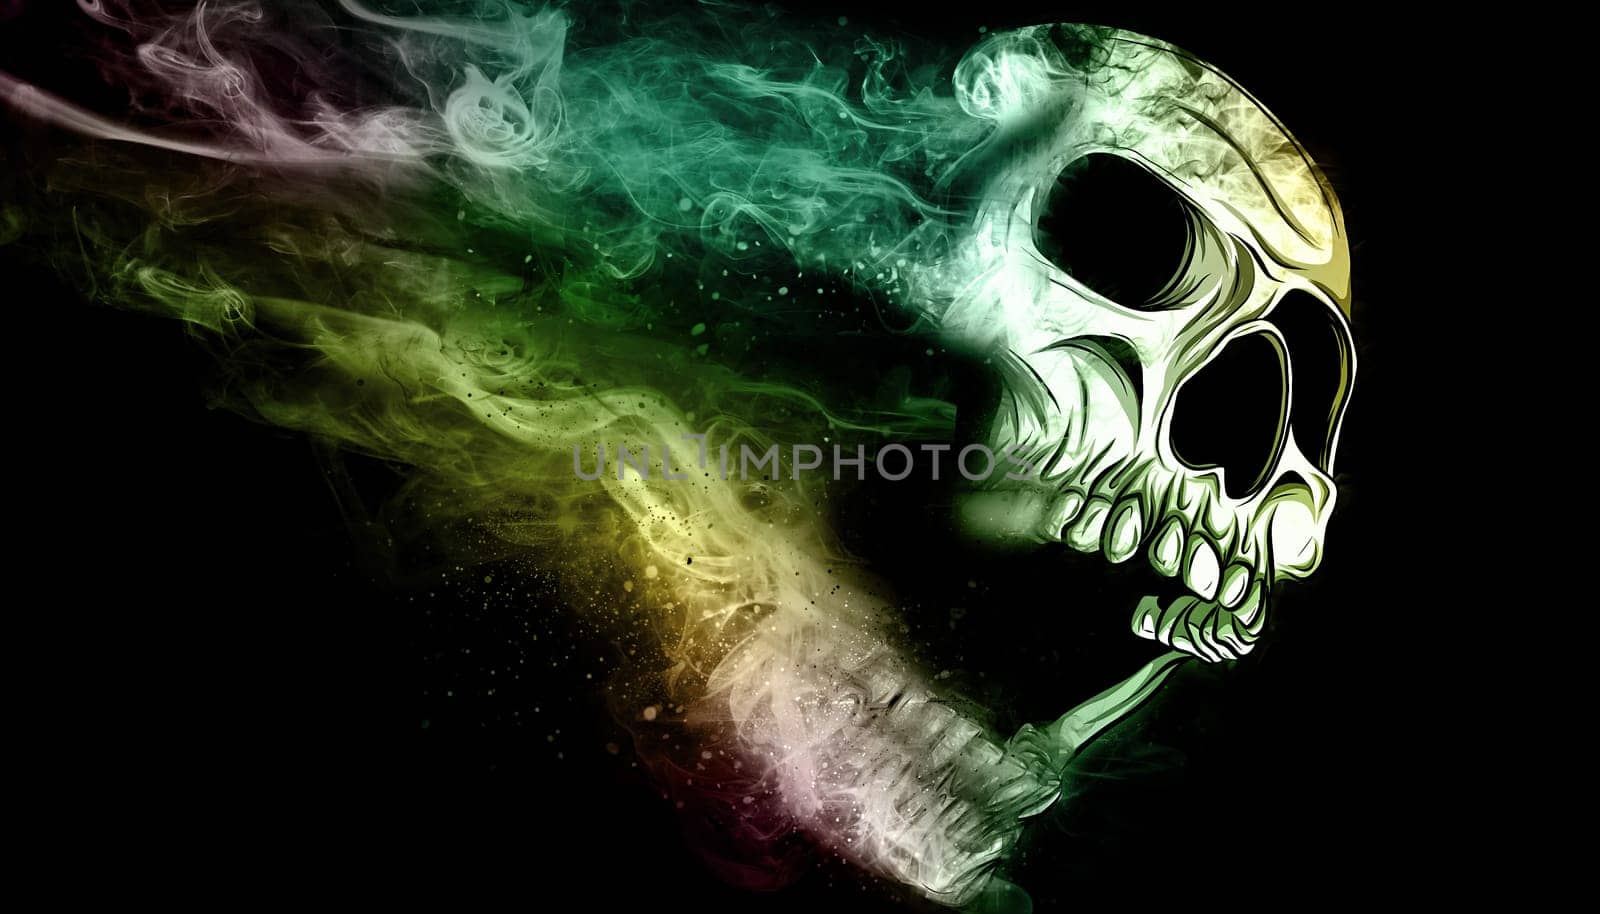 skull emerging from a cloud of smoke high contrast image by dean